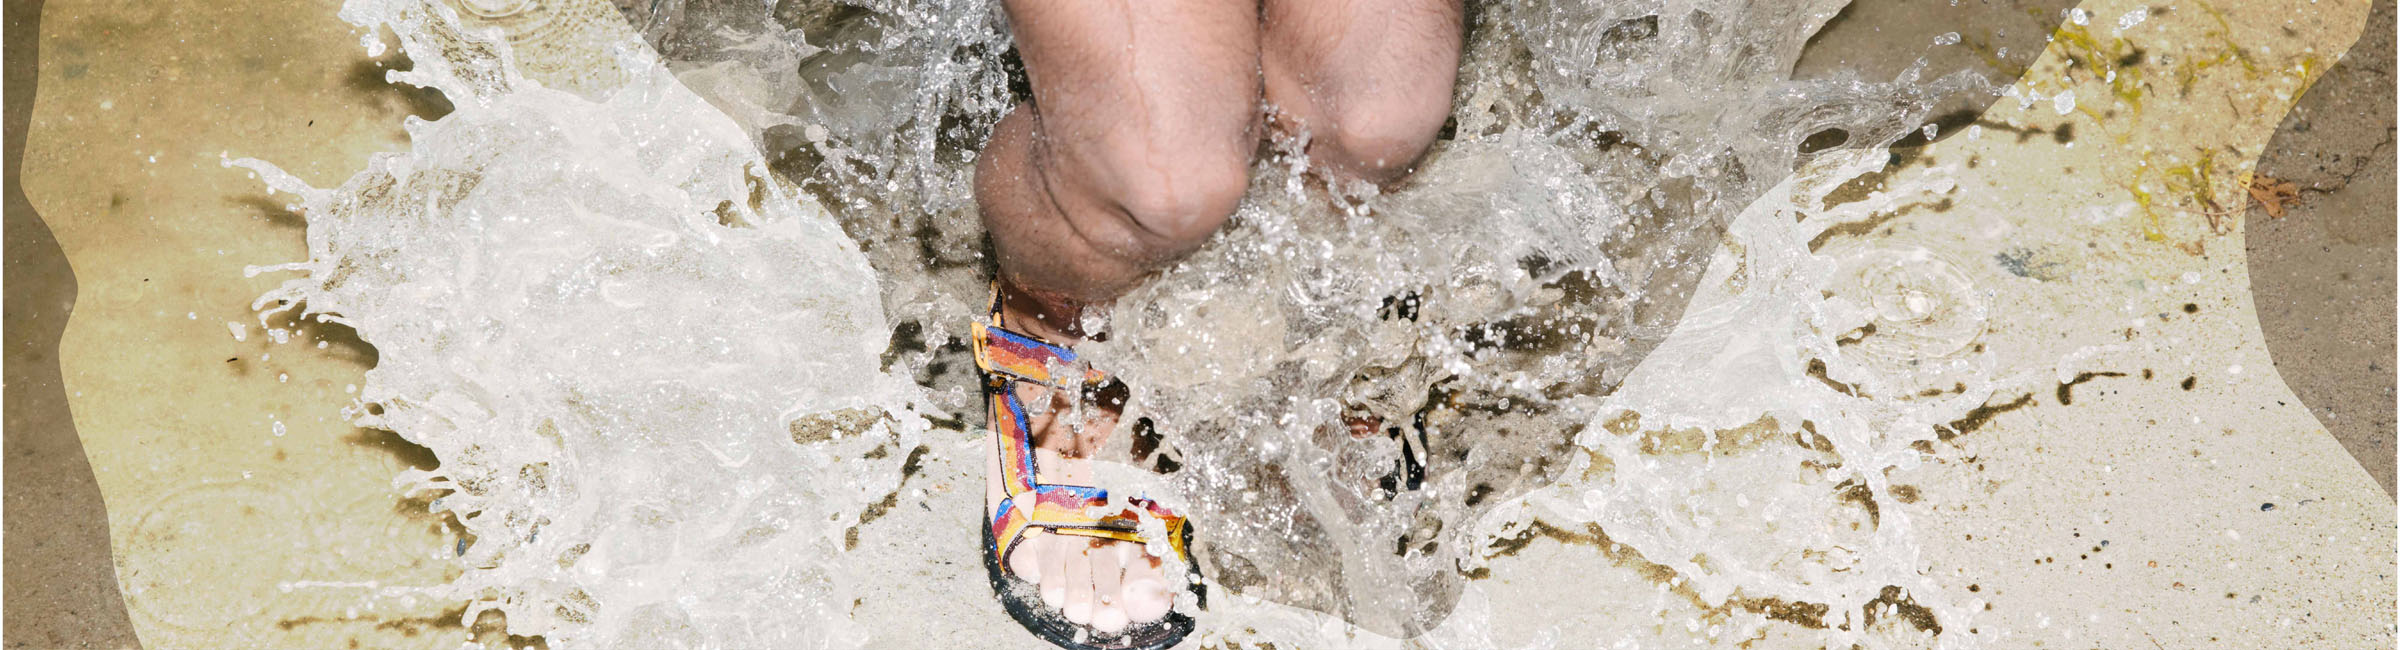 person knees down in sandals splashing in puddle